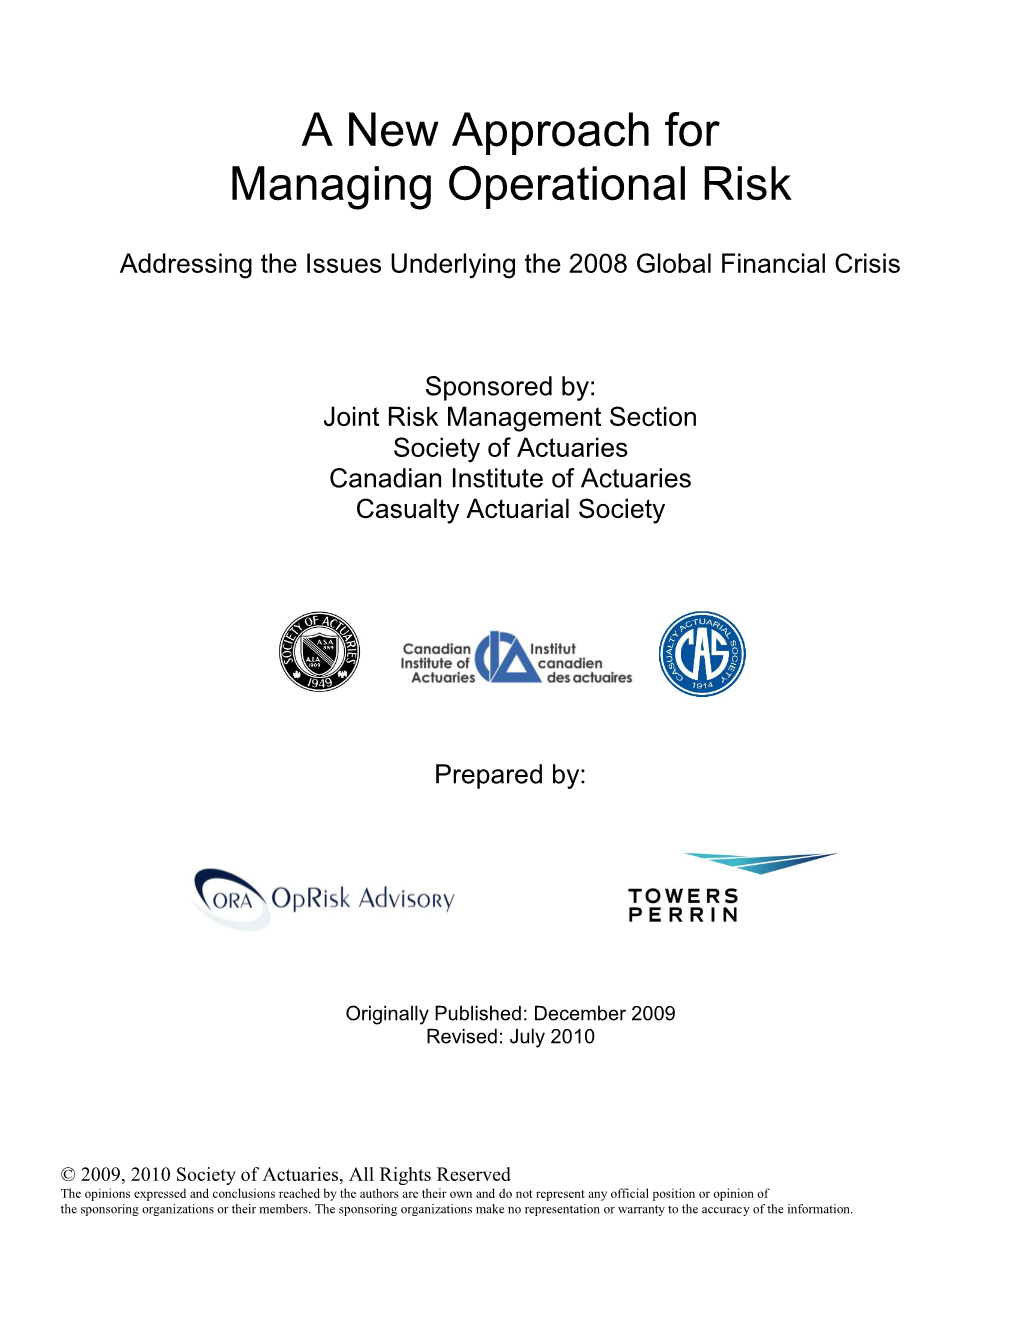 A New Approach for Managing Operational Risk